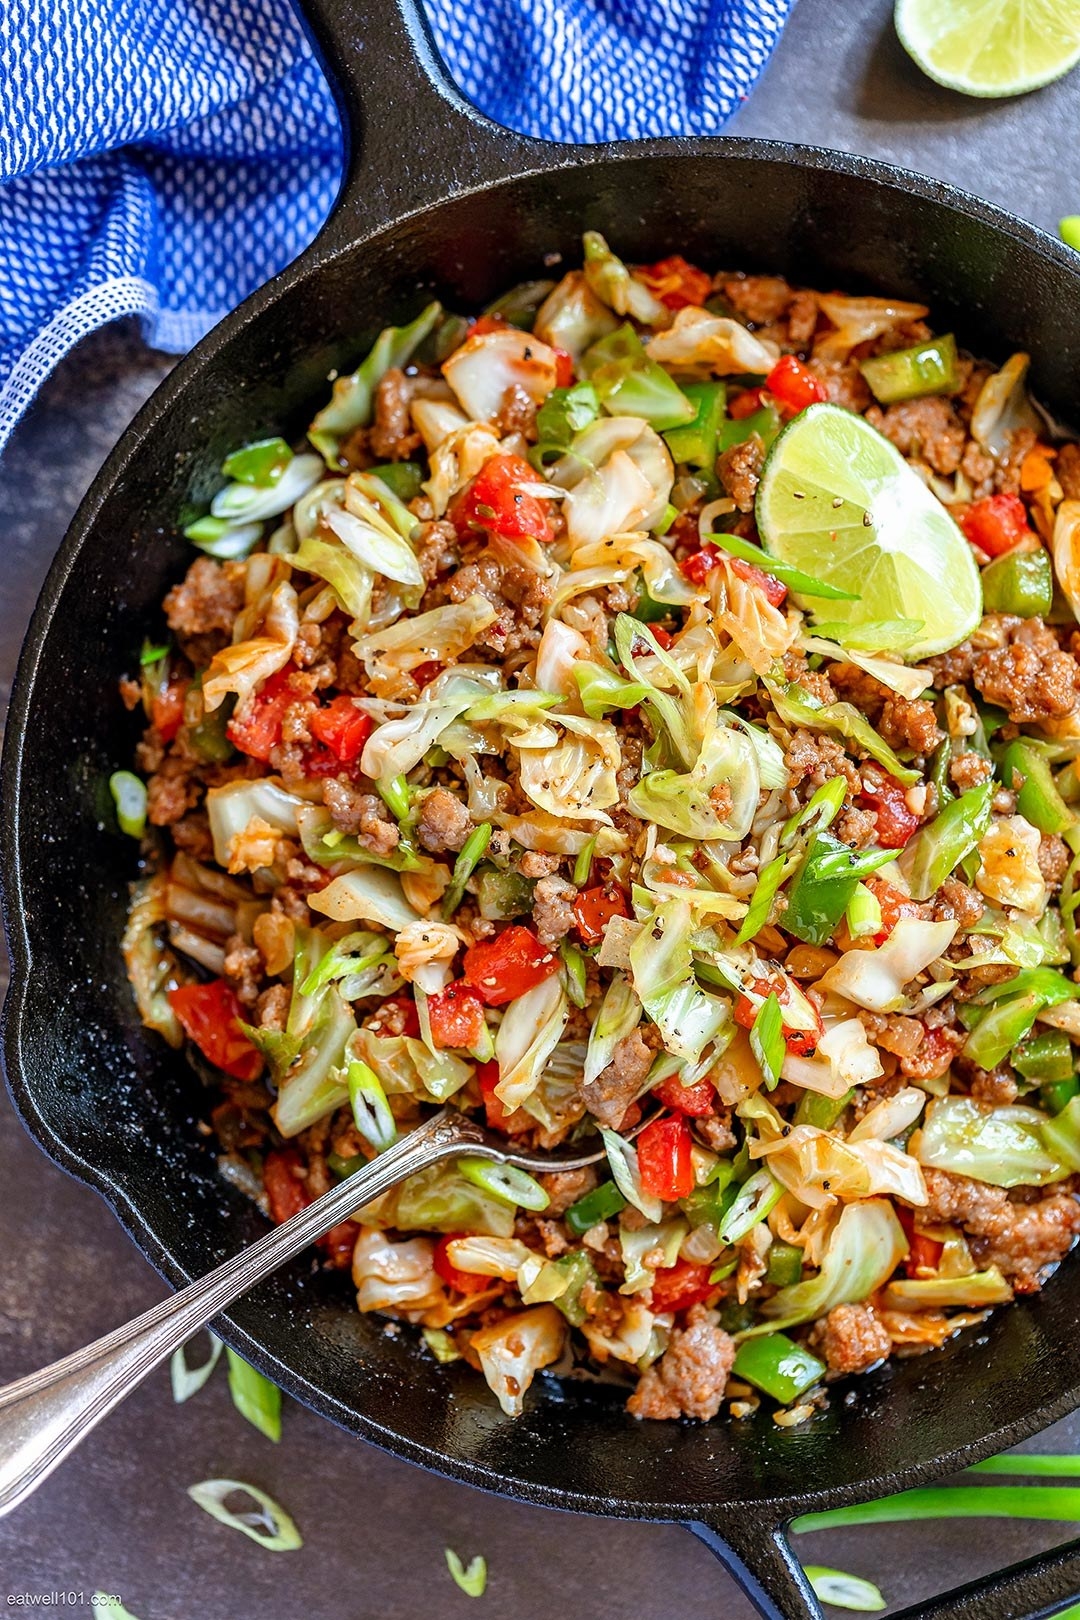 A skillet filled with crumbled sausage, green cabbage, and peppers.